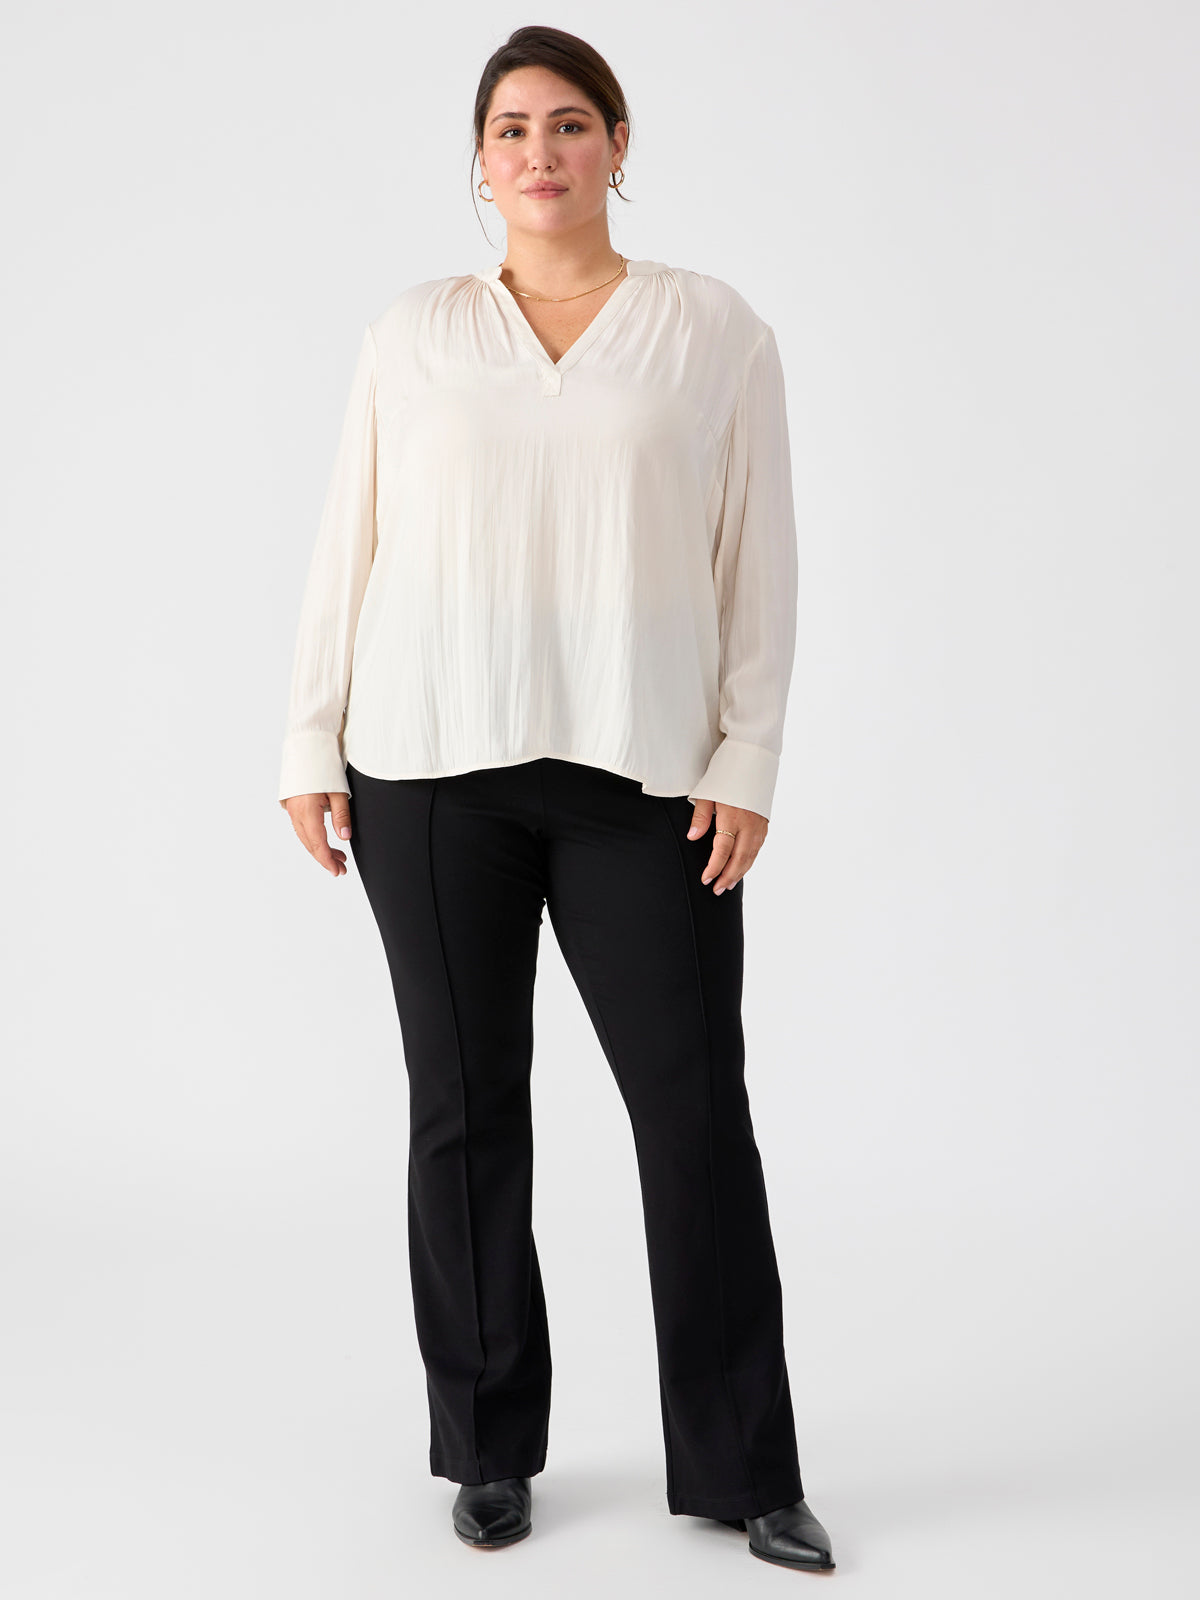 Lizzie Sateen Tunic Top Cappuccino Inclusive Collection